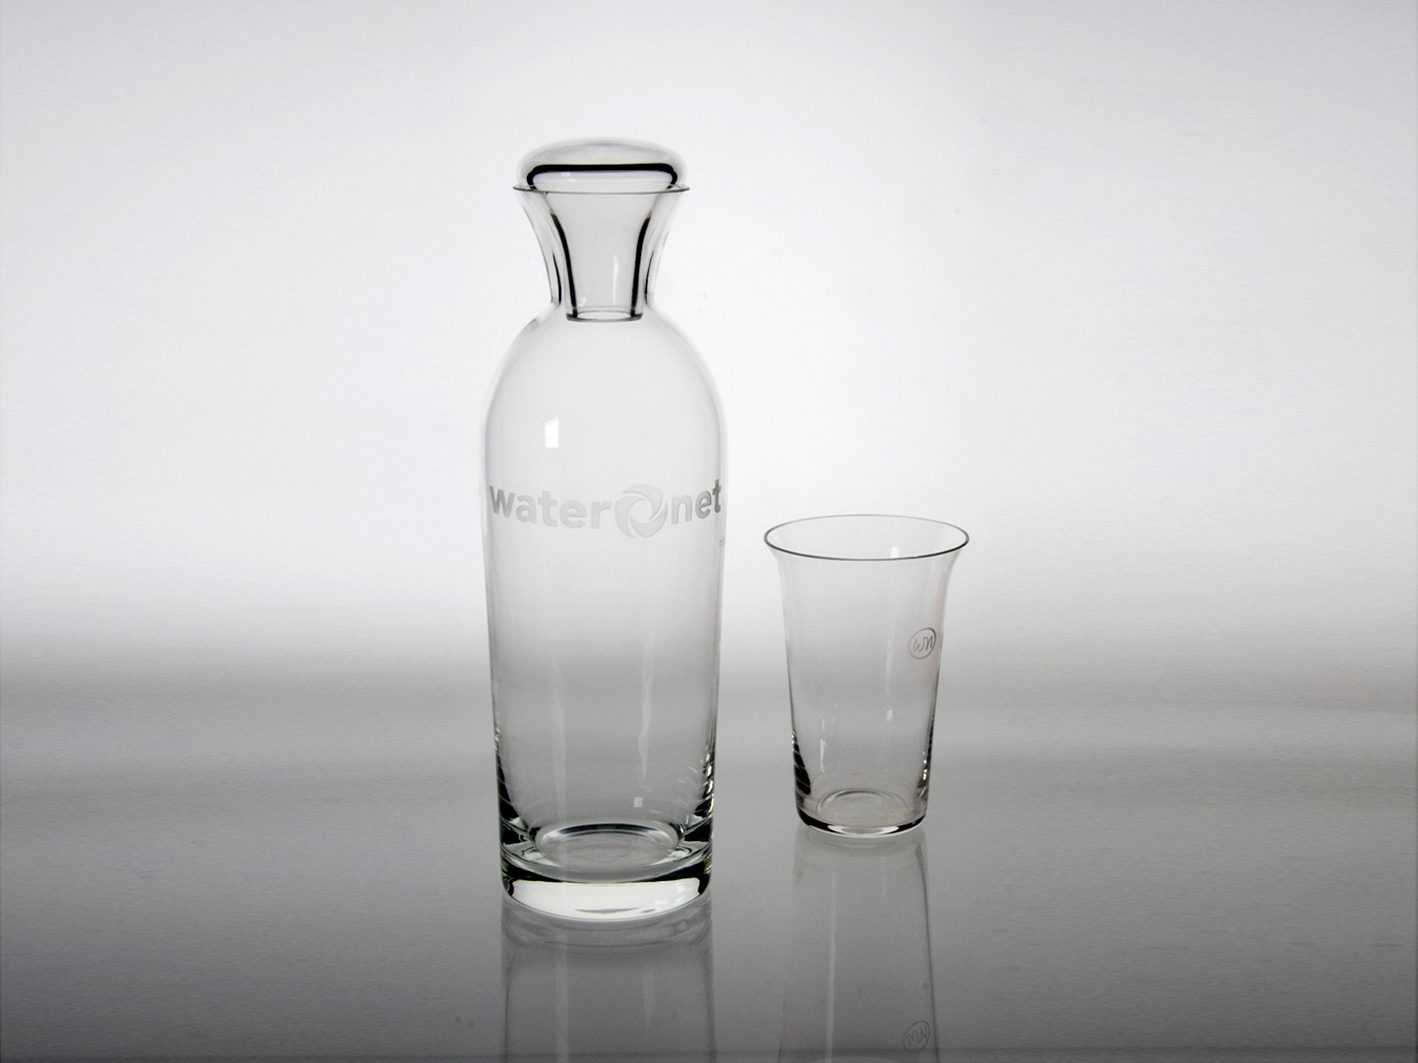 Waternet carafe and glass